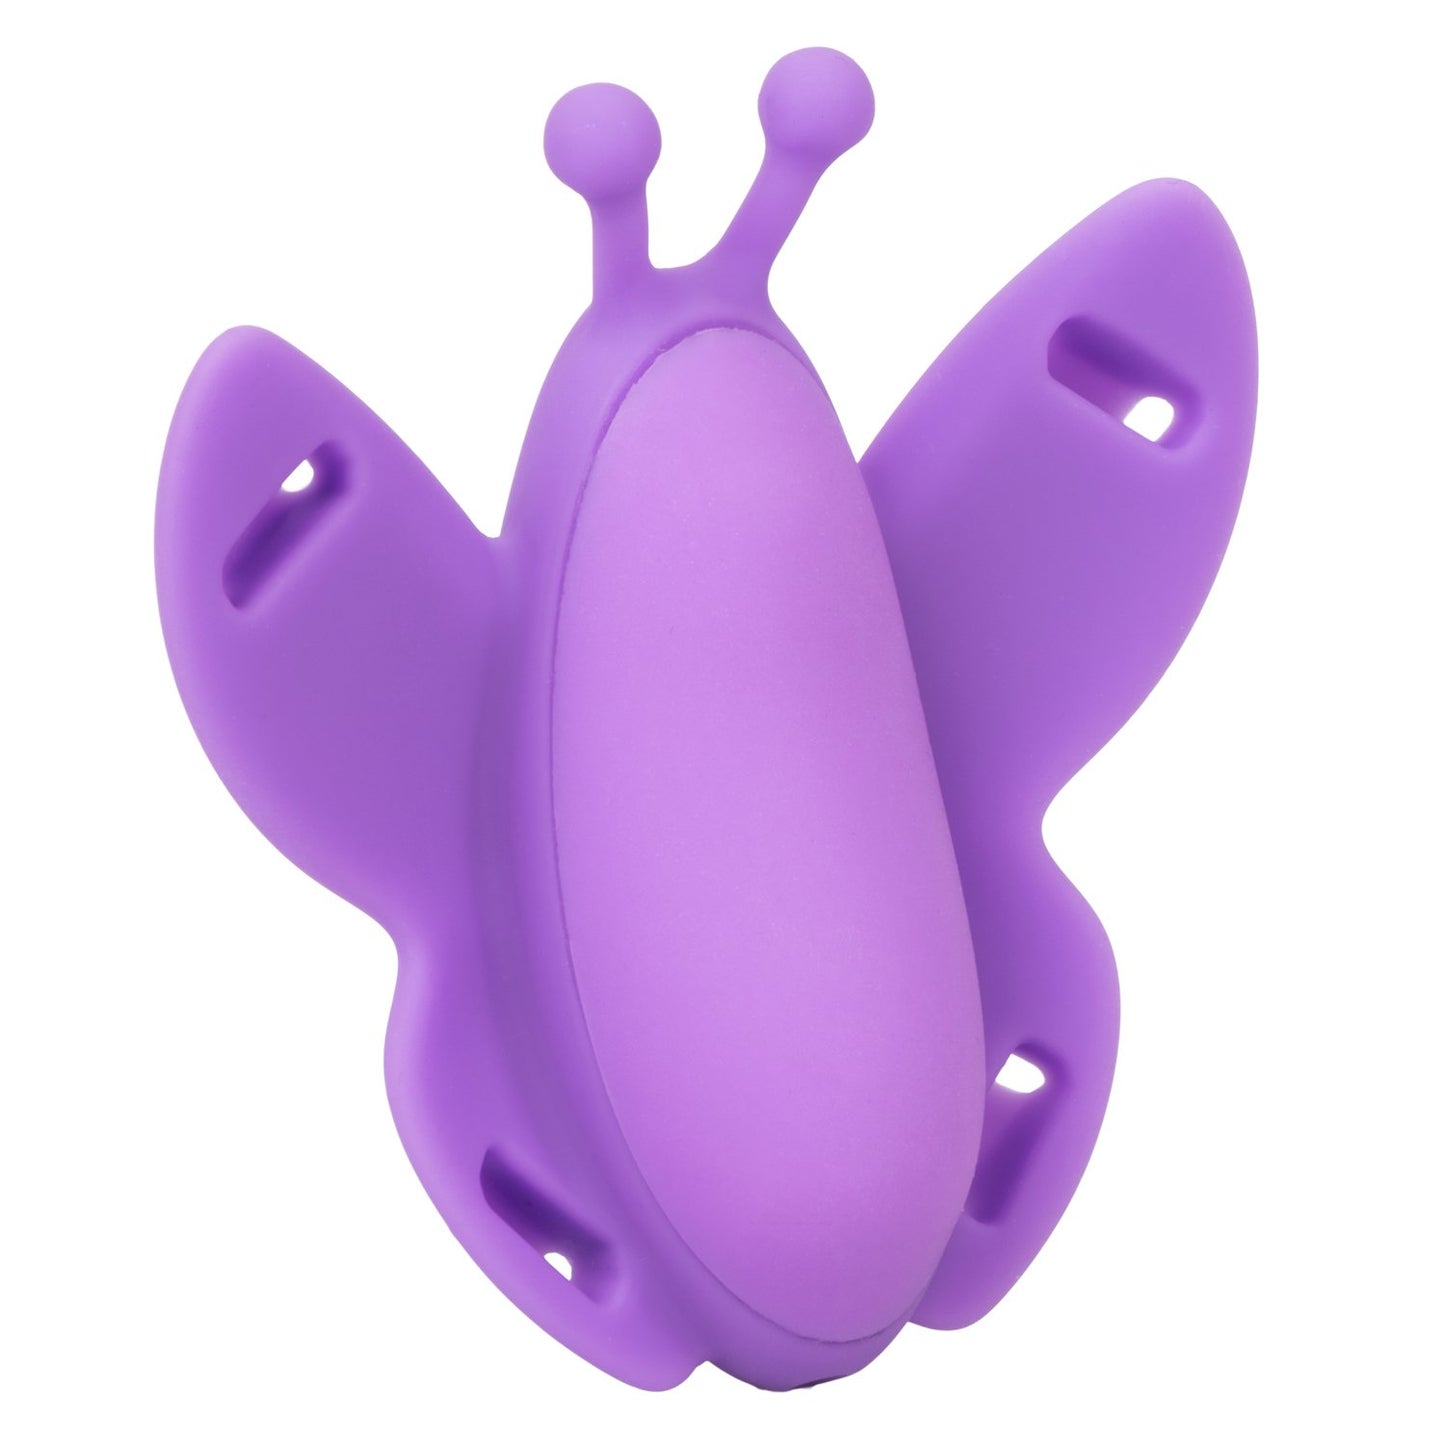 Venus Butterfly Silicone Remote Venus Butterfly